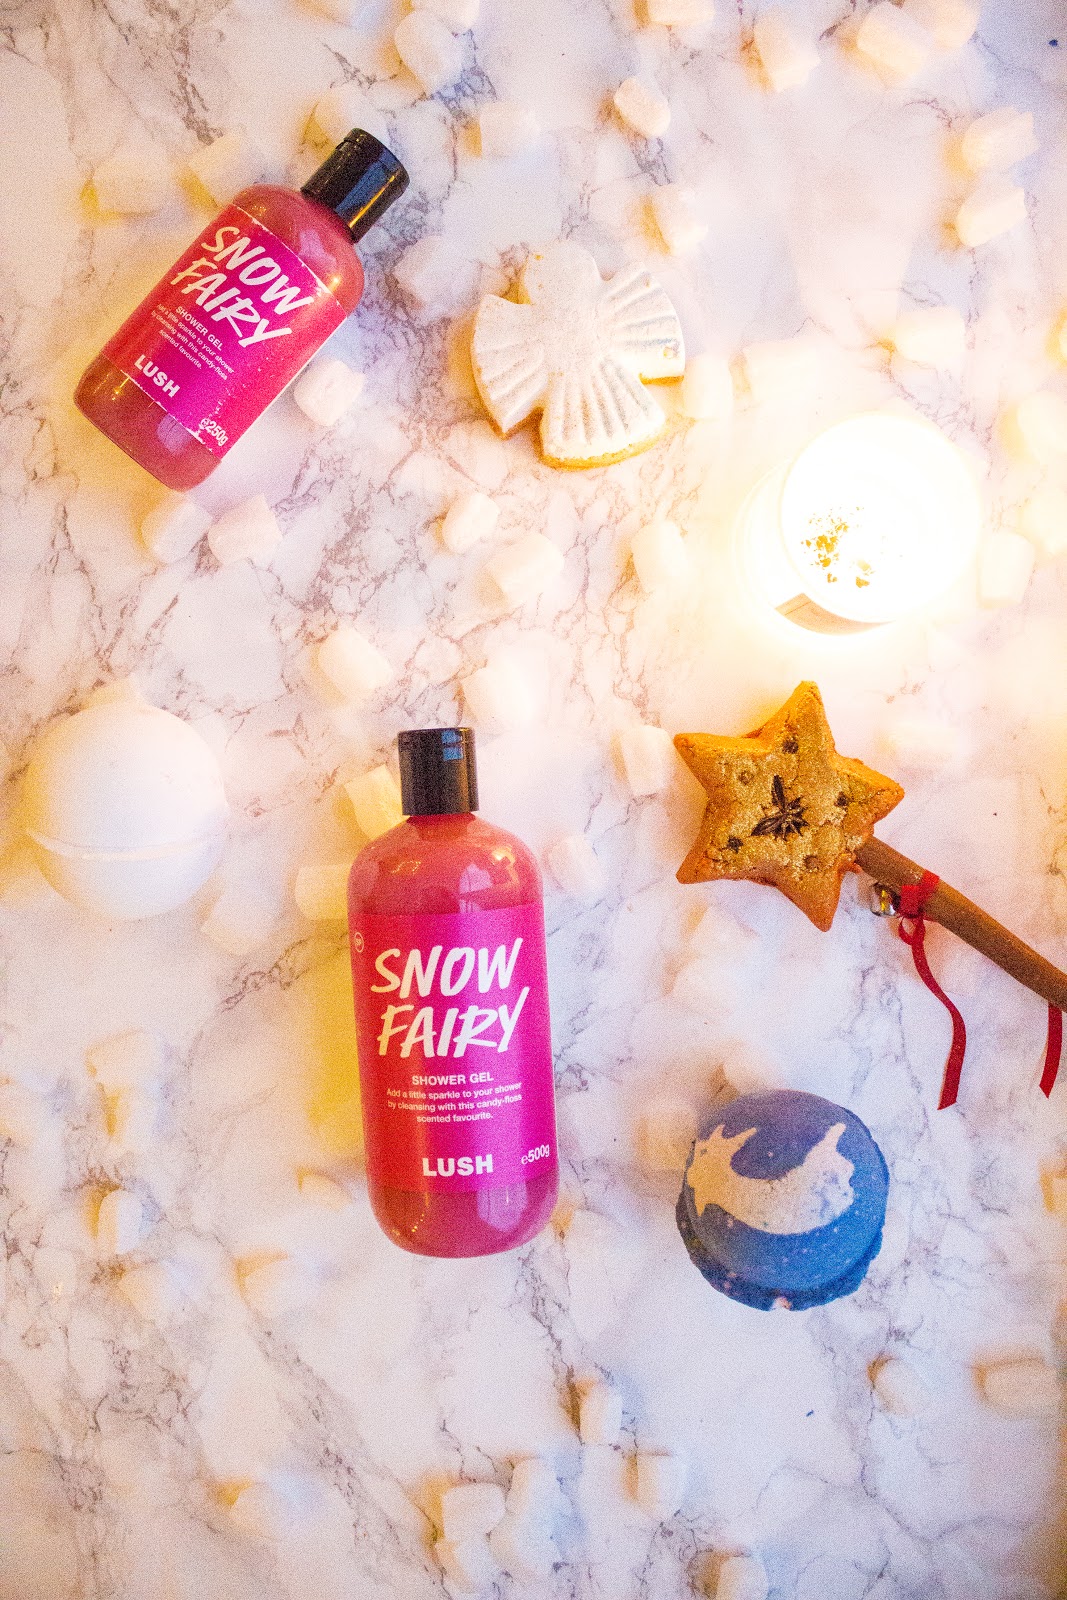 Lush Boxing Day Sale Haul - Snow Fairy, So White, Snow Angel, Shoot for the Stars, Magic of Christmas